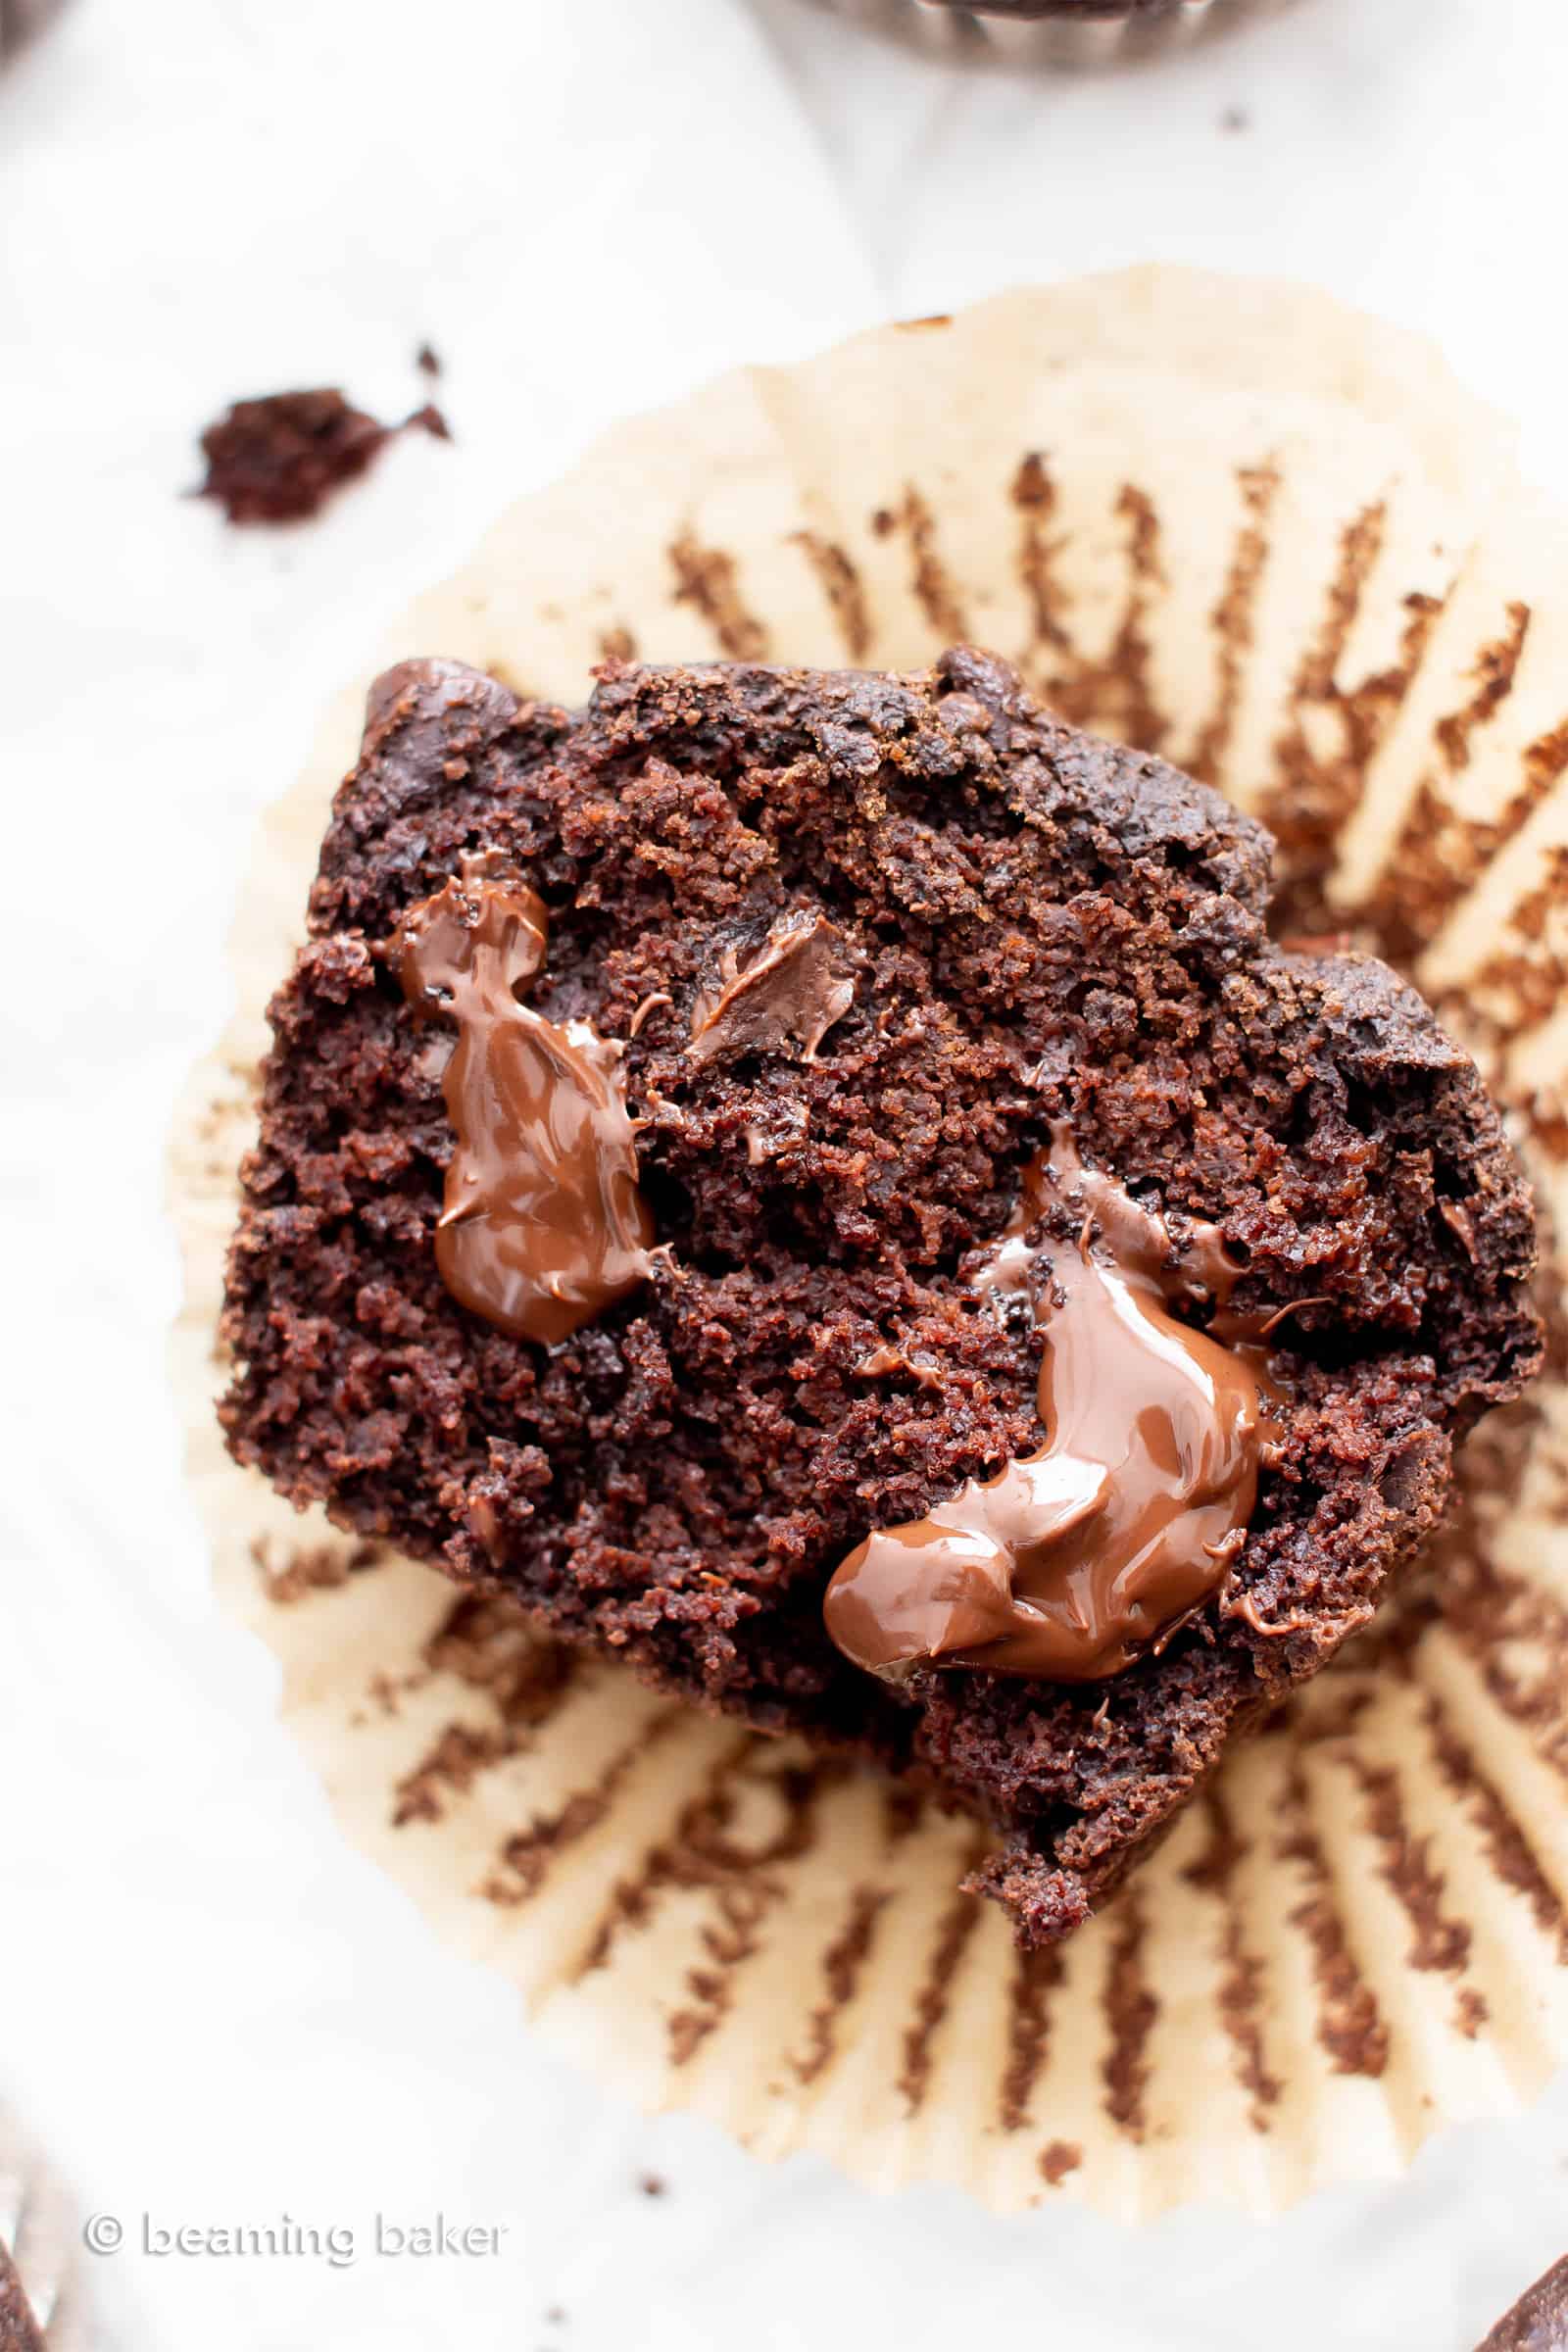 Best Vegan Gluten Free Moist Chocolate Muffins (V,GF): this easy moist gluten free double chocolate muffins recipe is incredible! It’s the best vegan chocolate muffins recipe—egg free, healthy ingredients! #Chocolate #Vegan #GlutenFree #Muffins #Healthy | Recipe at BeamingBaker.com